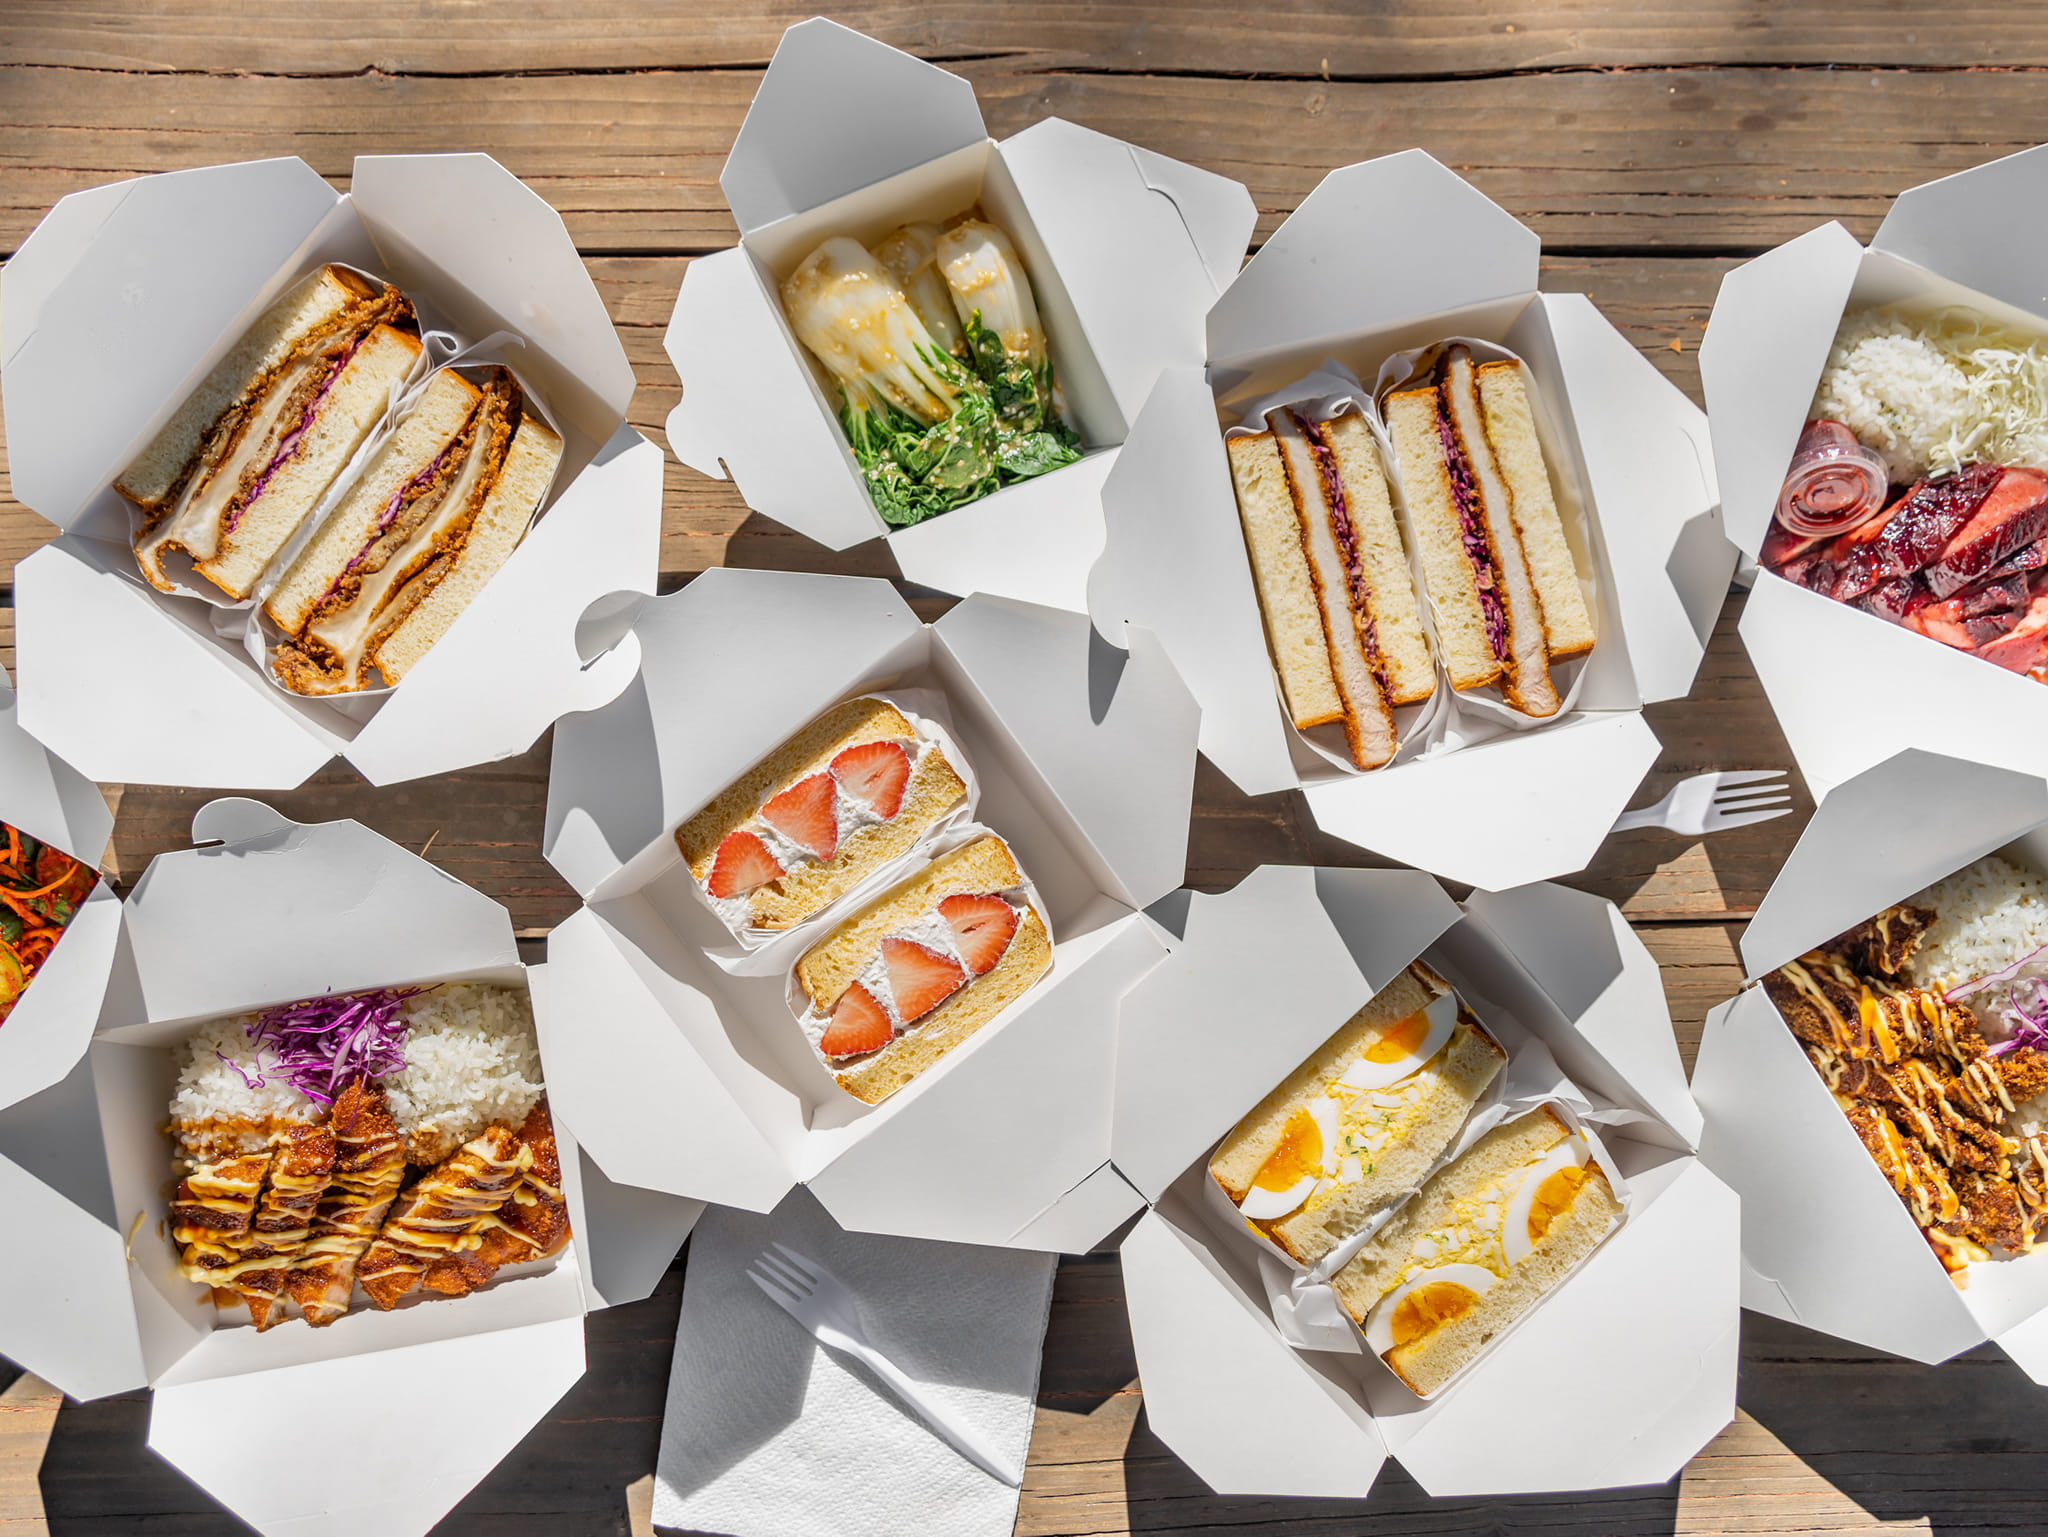 A picnic table is adorned with Japanese sandwiches from Tucson restaurant Fatboy Sandos.